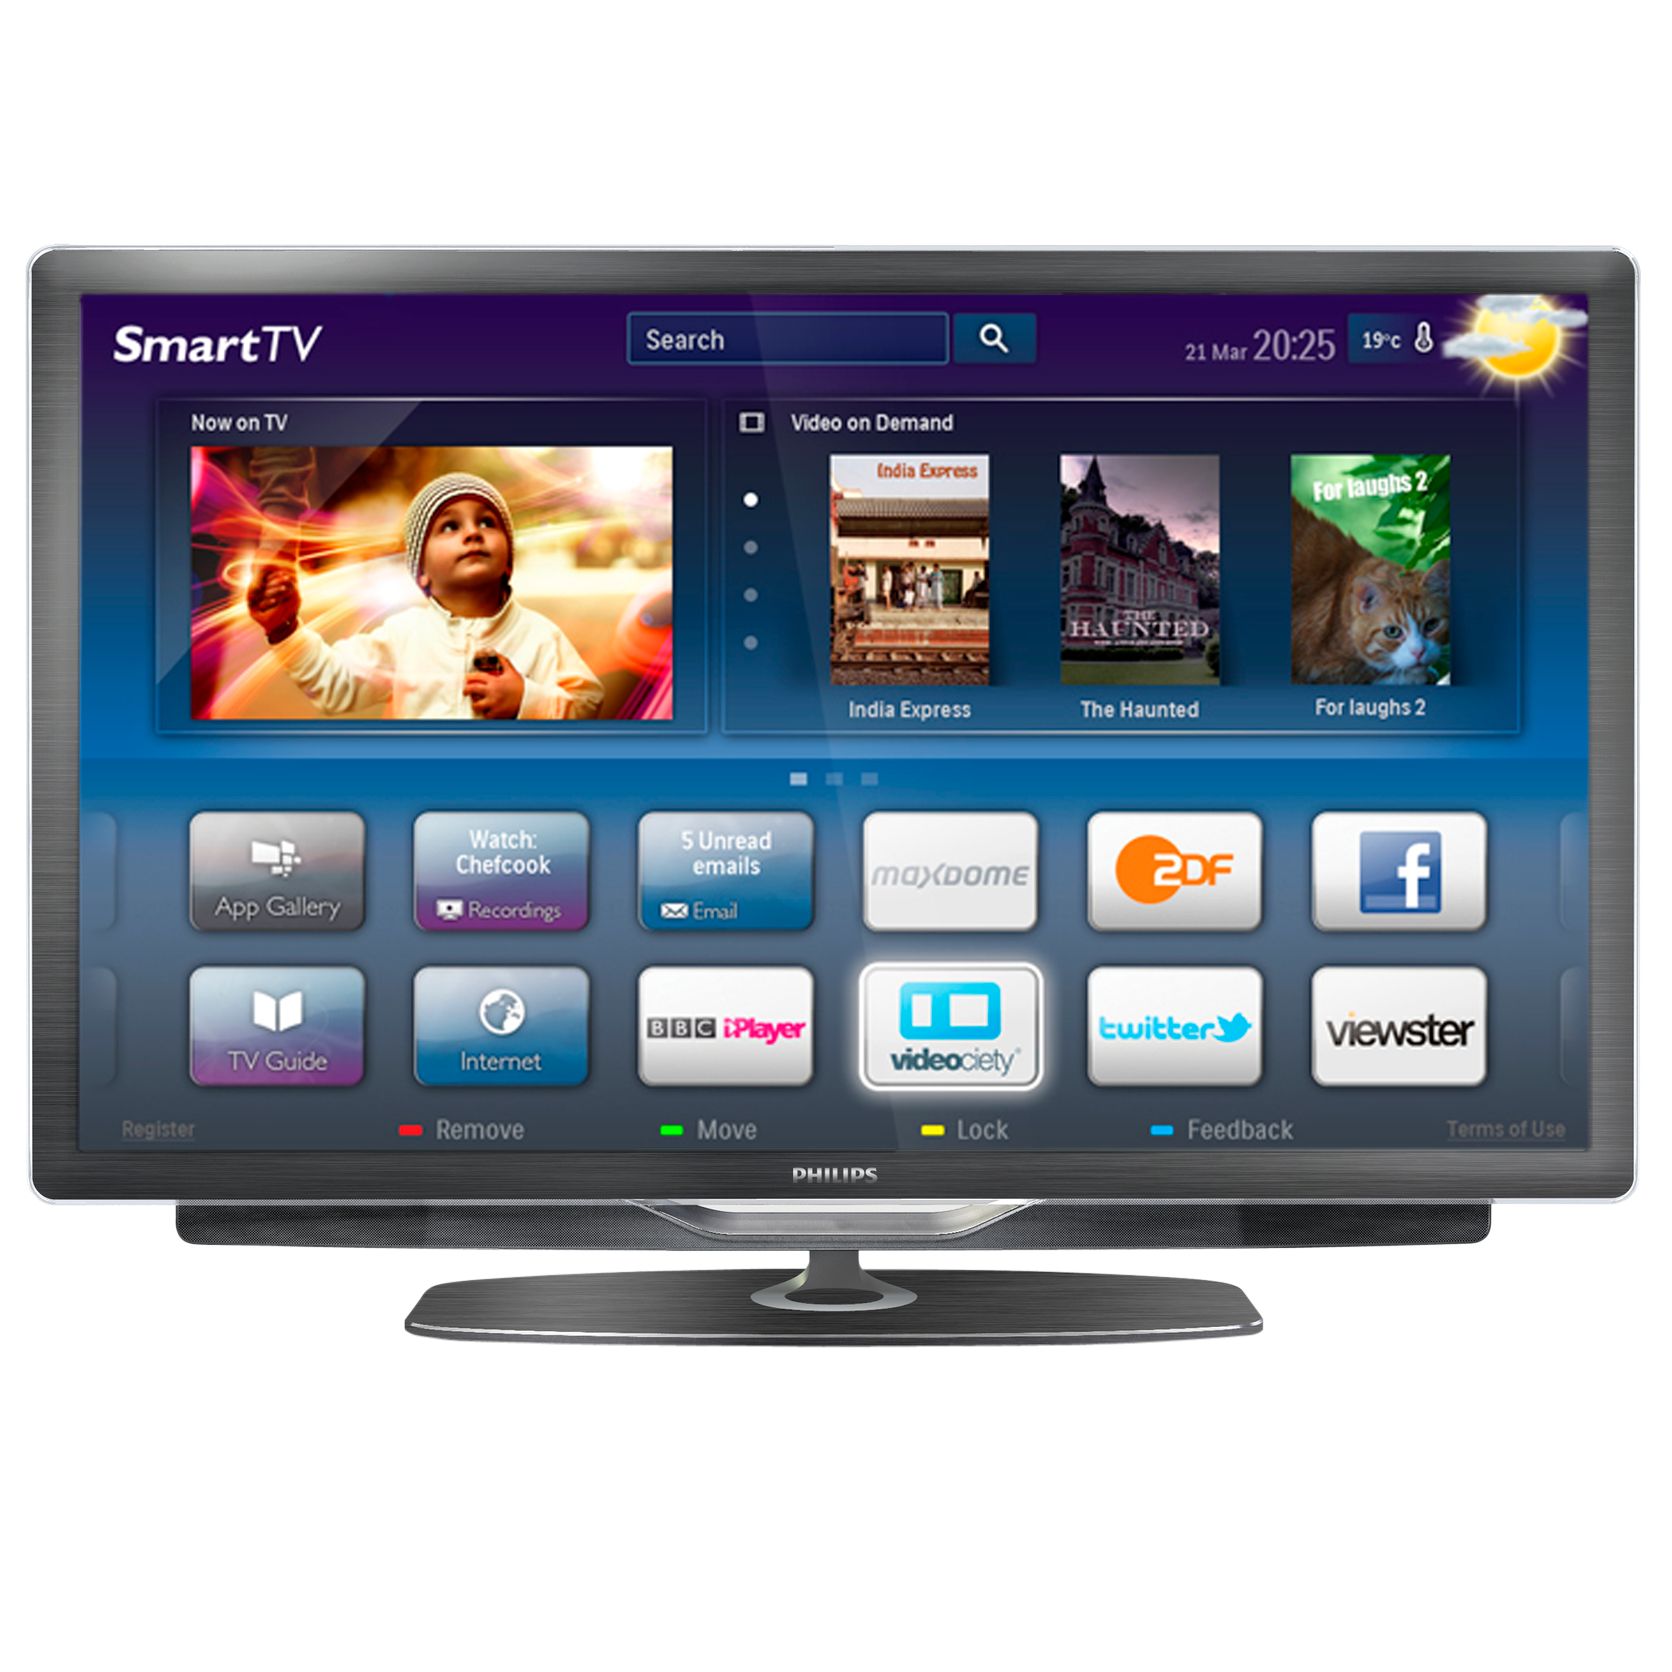 Philips 46PFL9705H/05 LCD/LED HD 1080p 3D Television, 46 Inch at JohnLewis